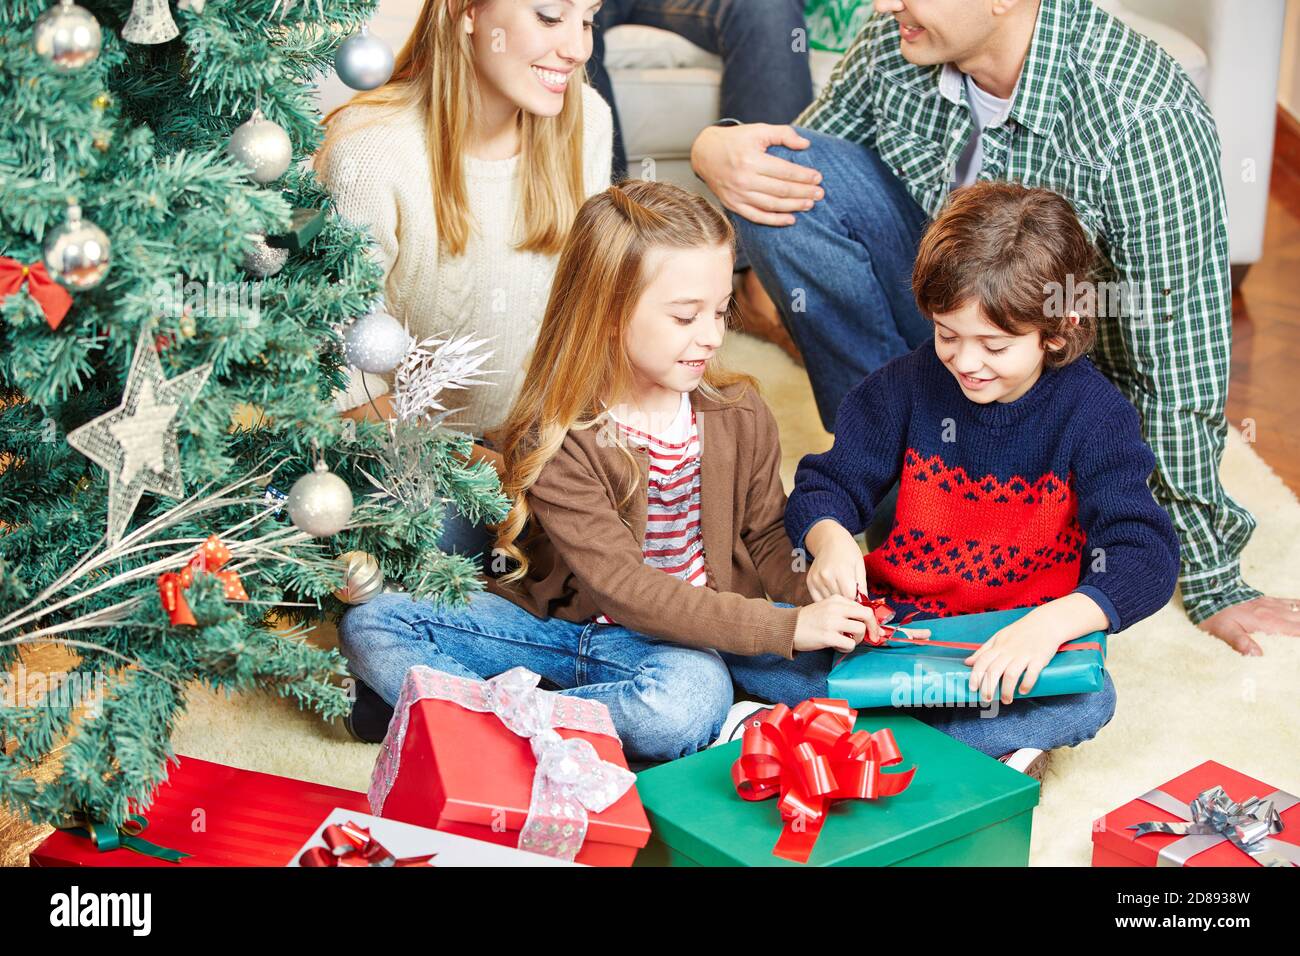 Two children open Christmas presents with family next to Christmas tree Stock Photo